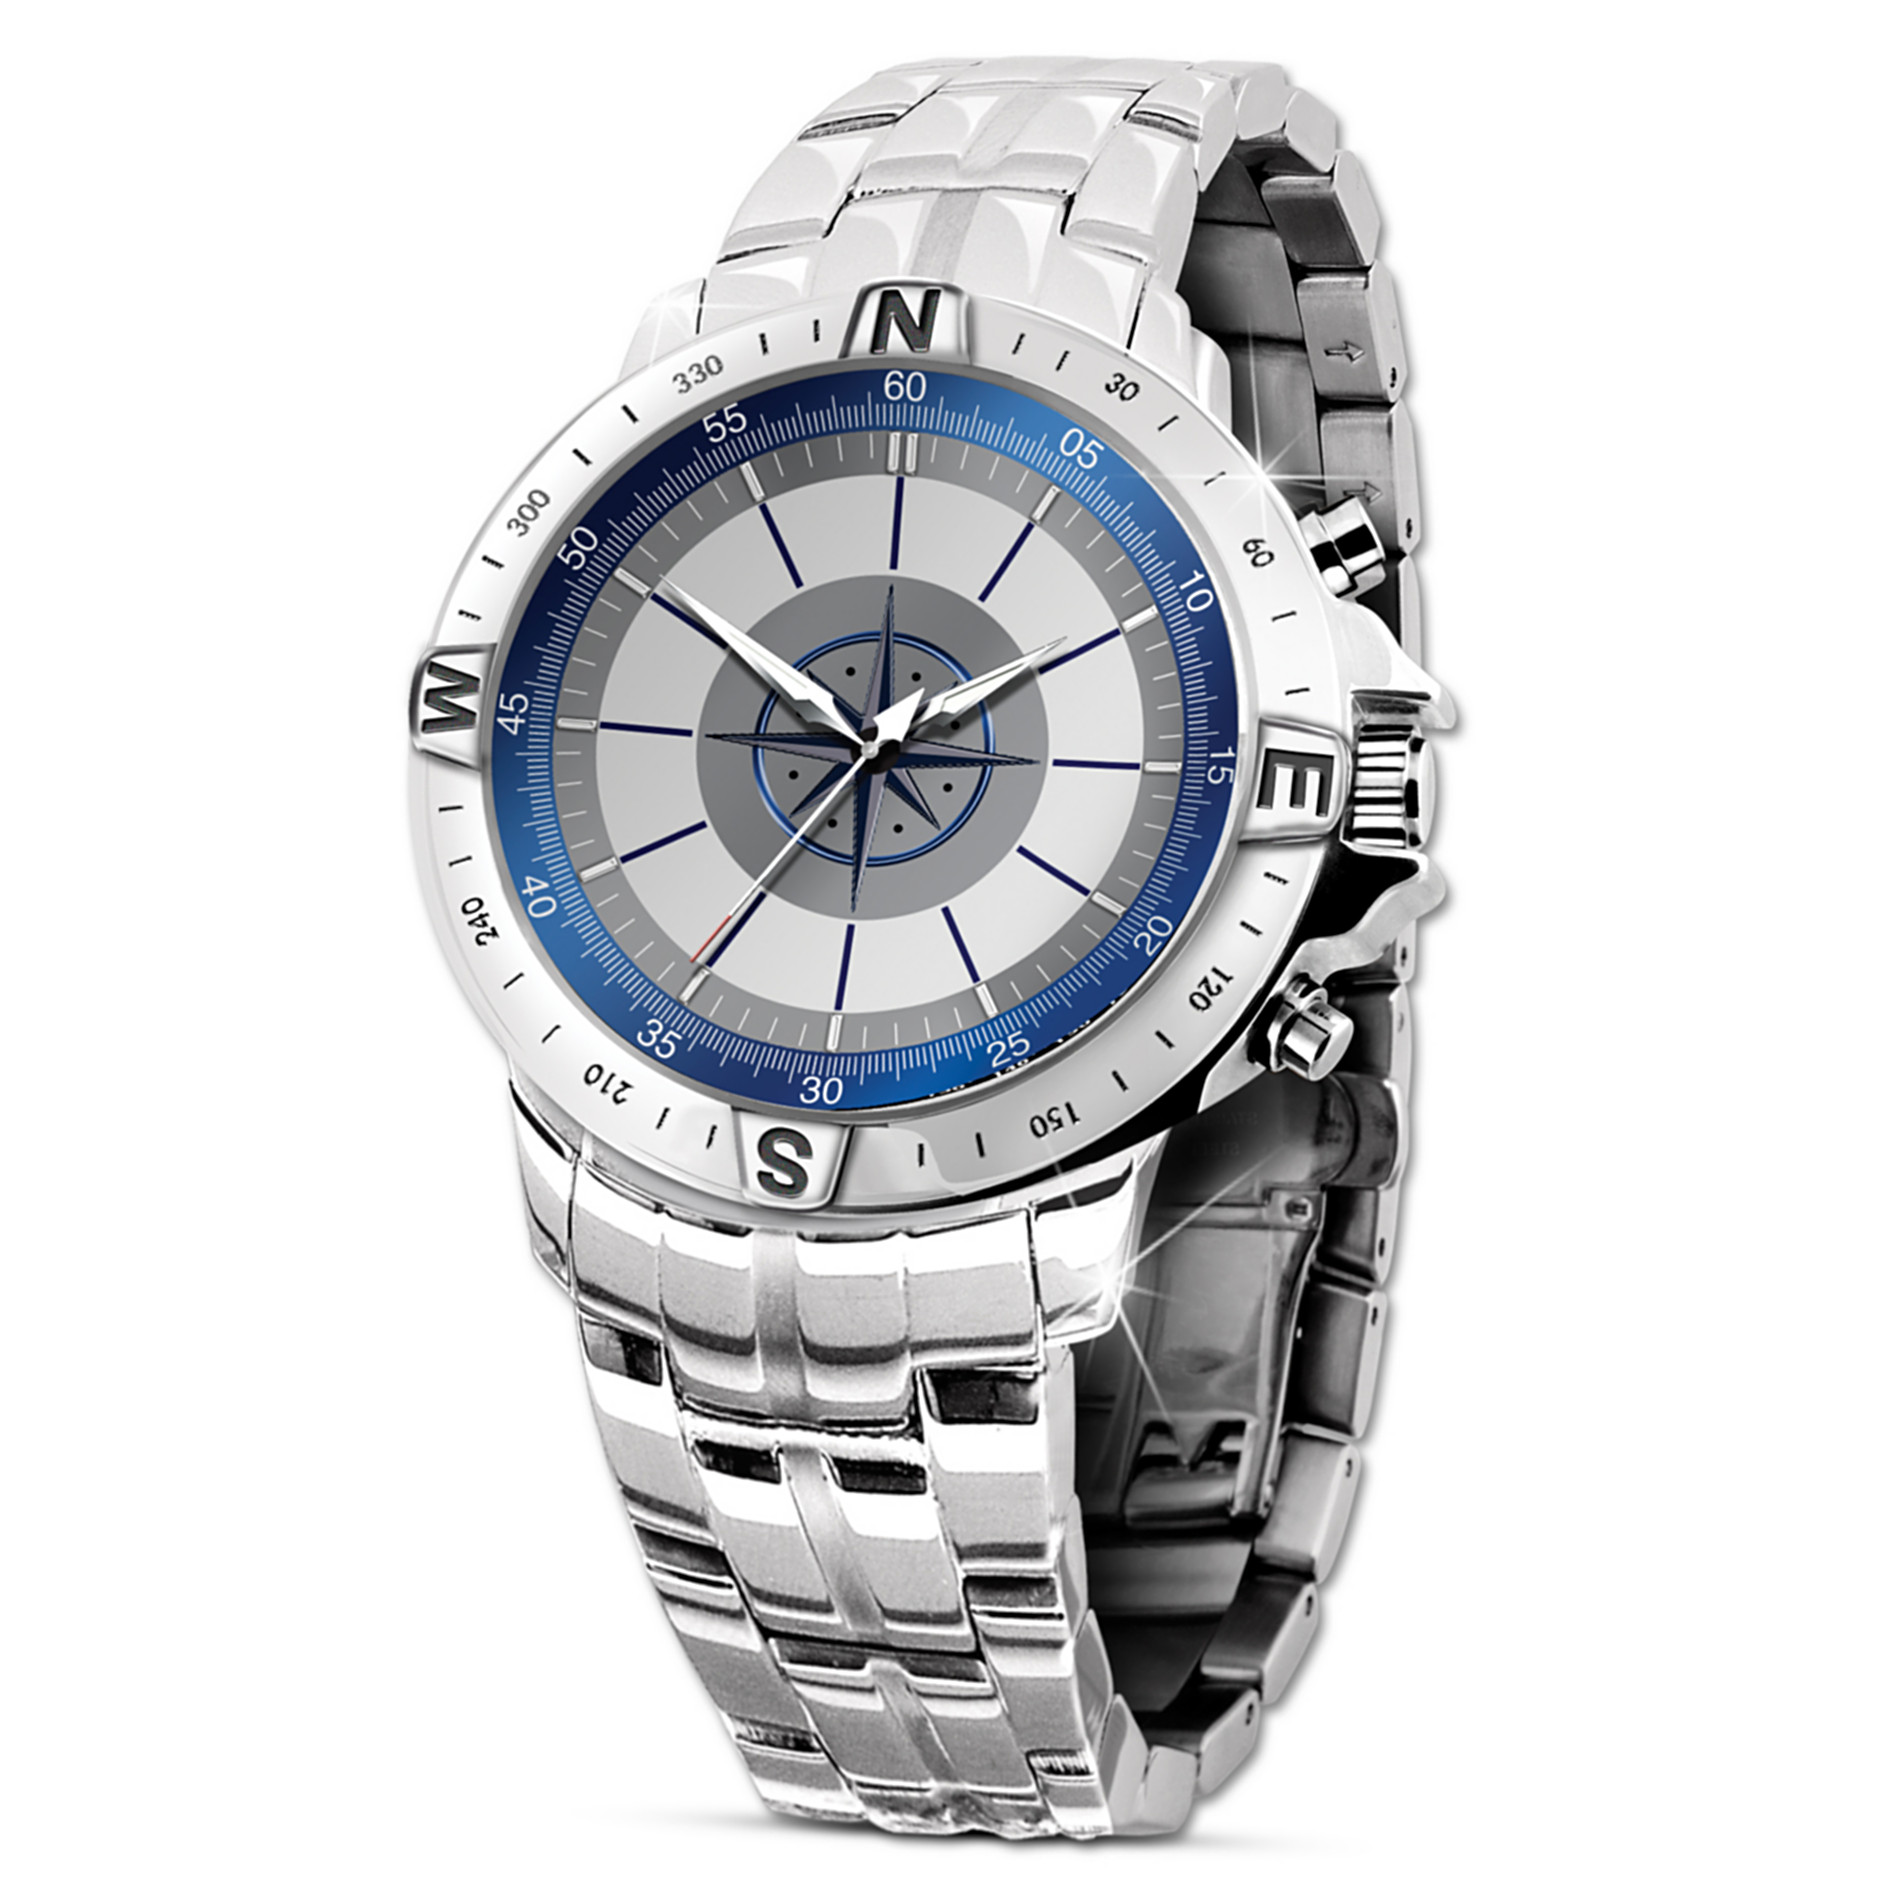 ... Men's Watch: Forge Your Own Path, My Grandson Men's Watch at Sears.com